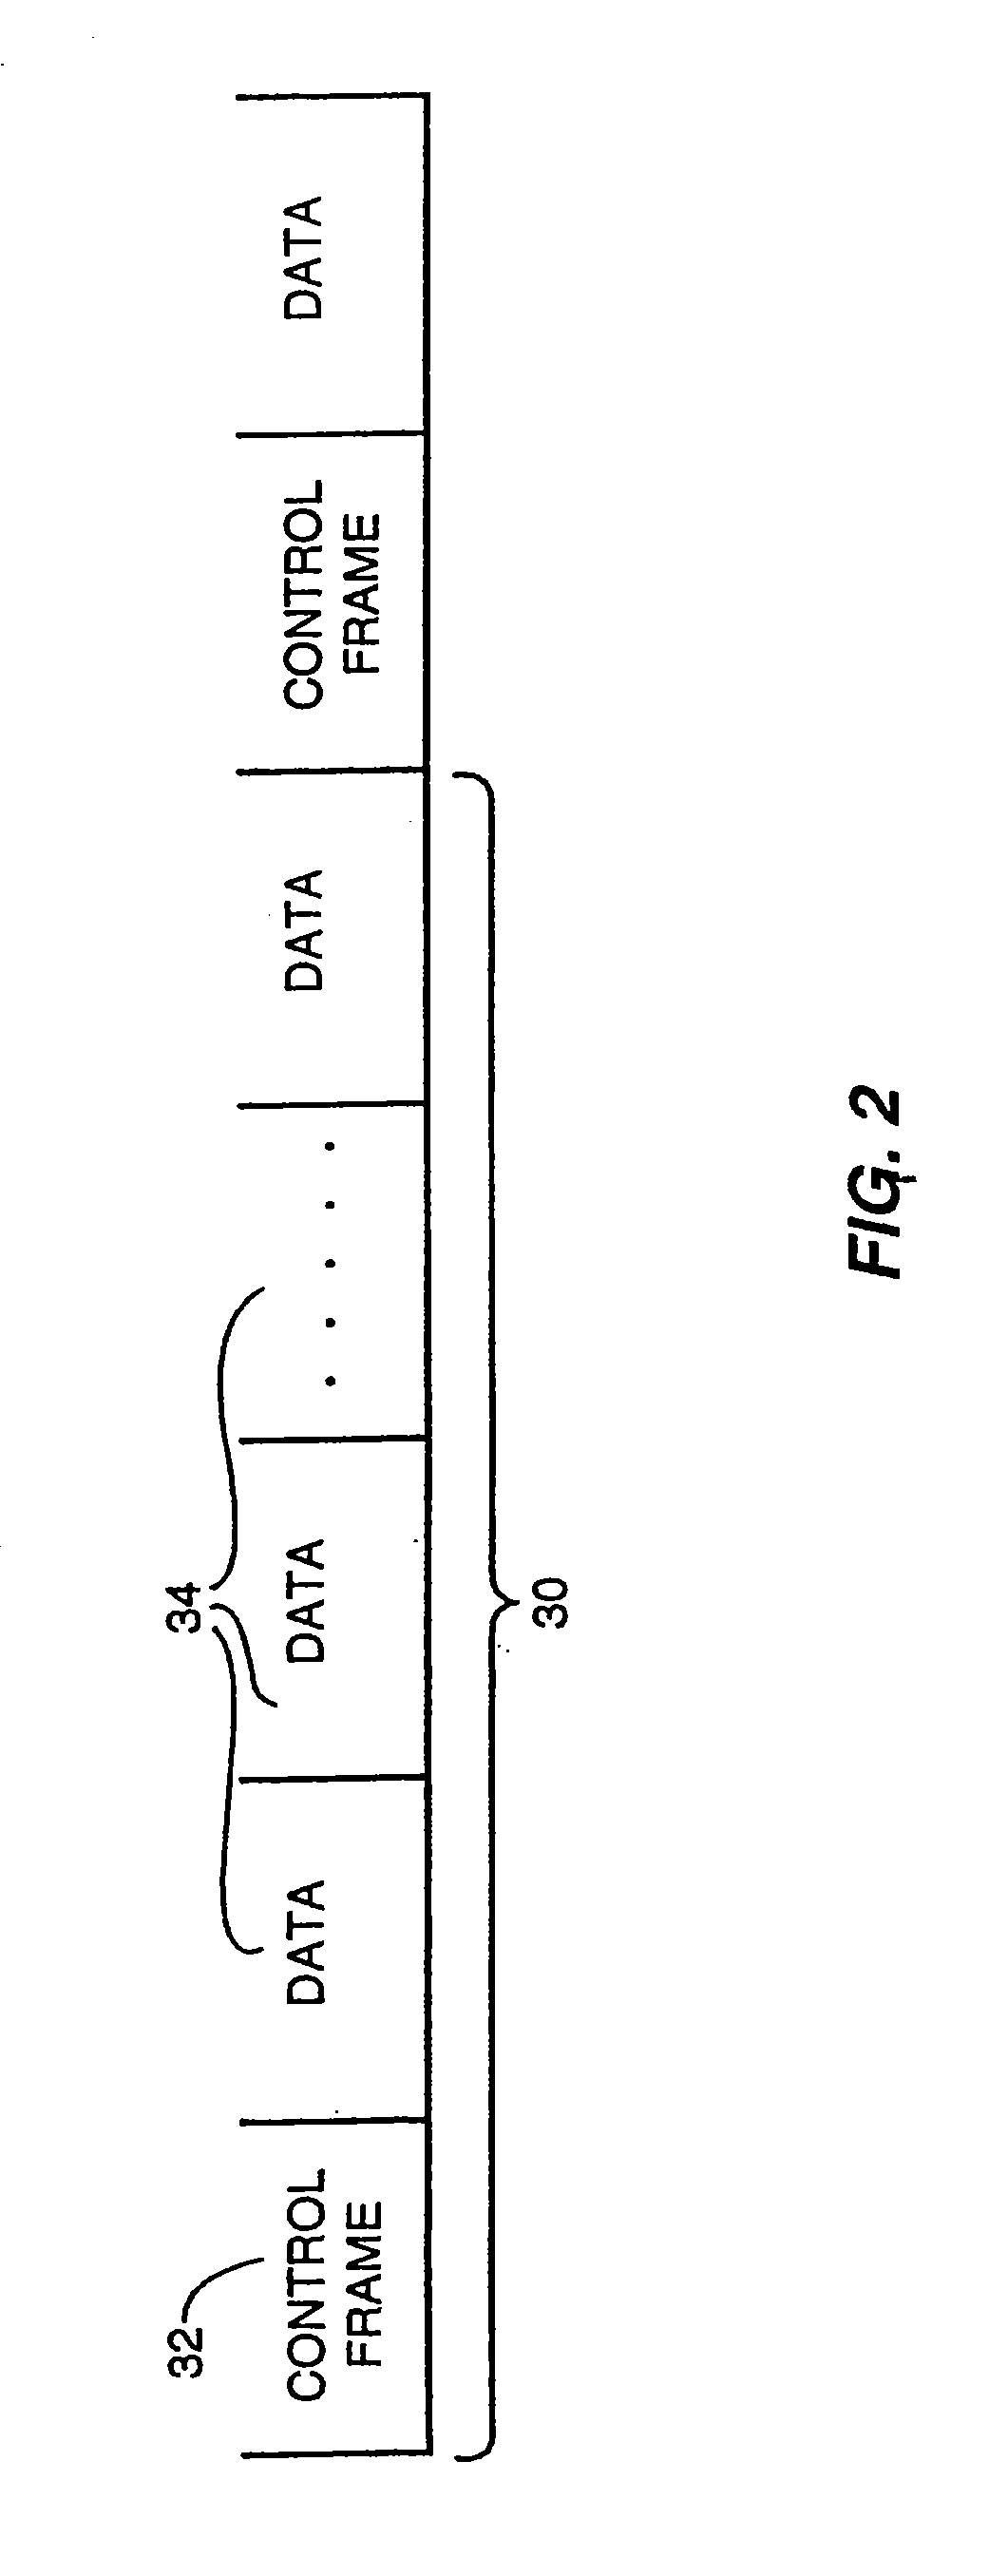 Adaptive Allocation For Variable Bandwidth Multicarrier Communication